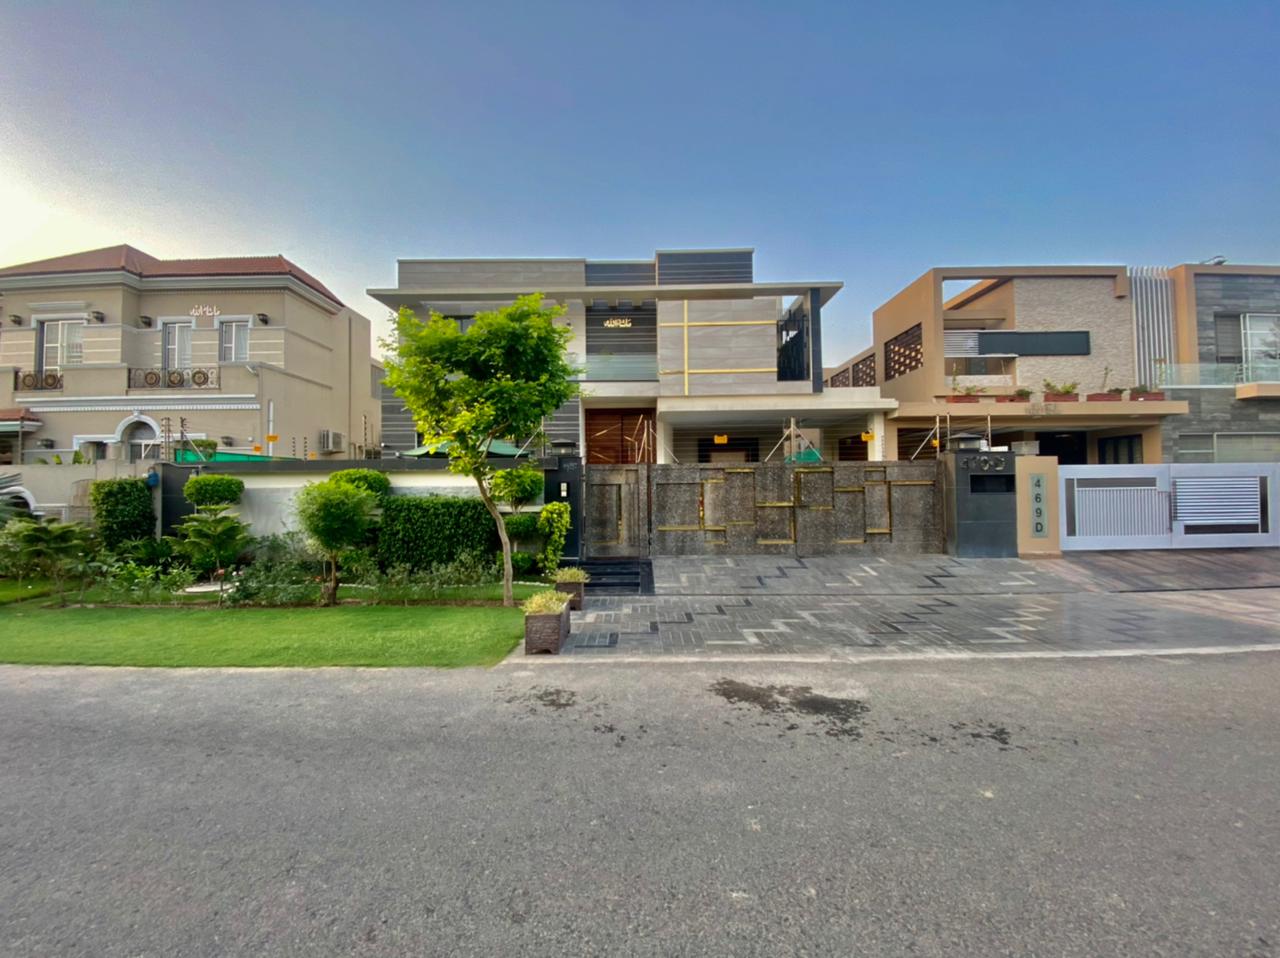 1 Kanal Slightly Used Furnished House For SALE In DHA Phase